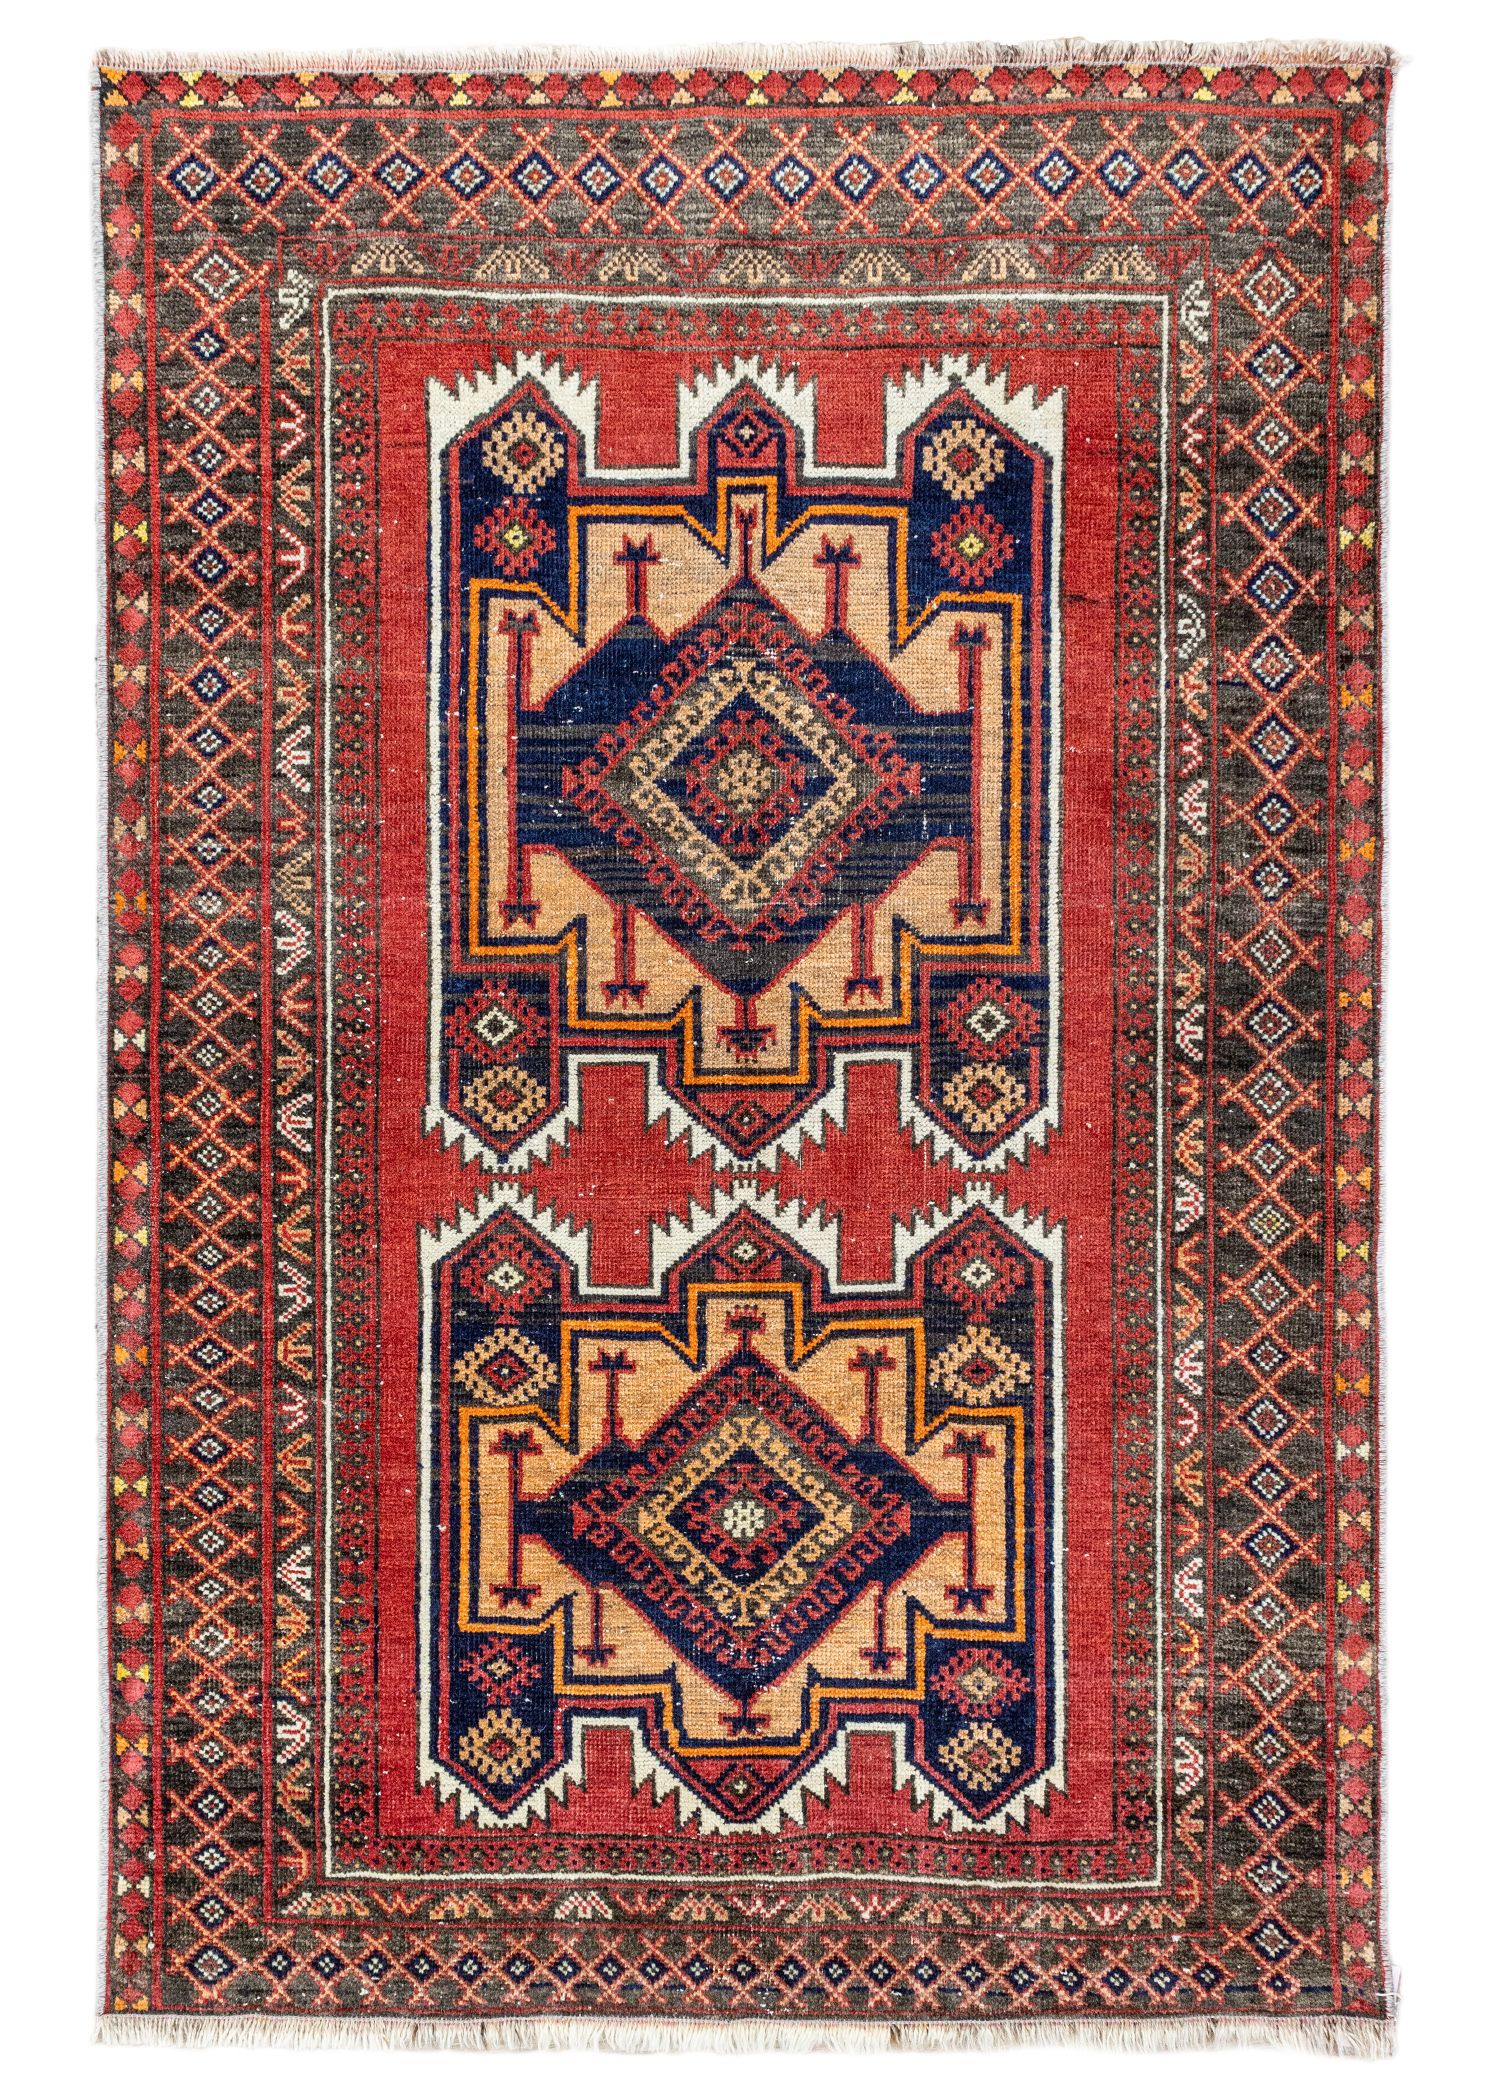 Sircan Ethnic Red Hand-Woven Persian Rug 91x134 cm